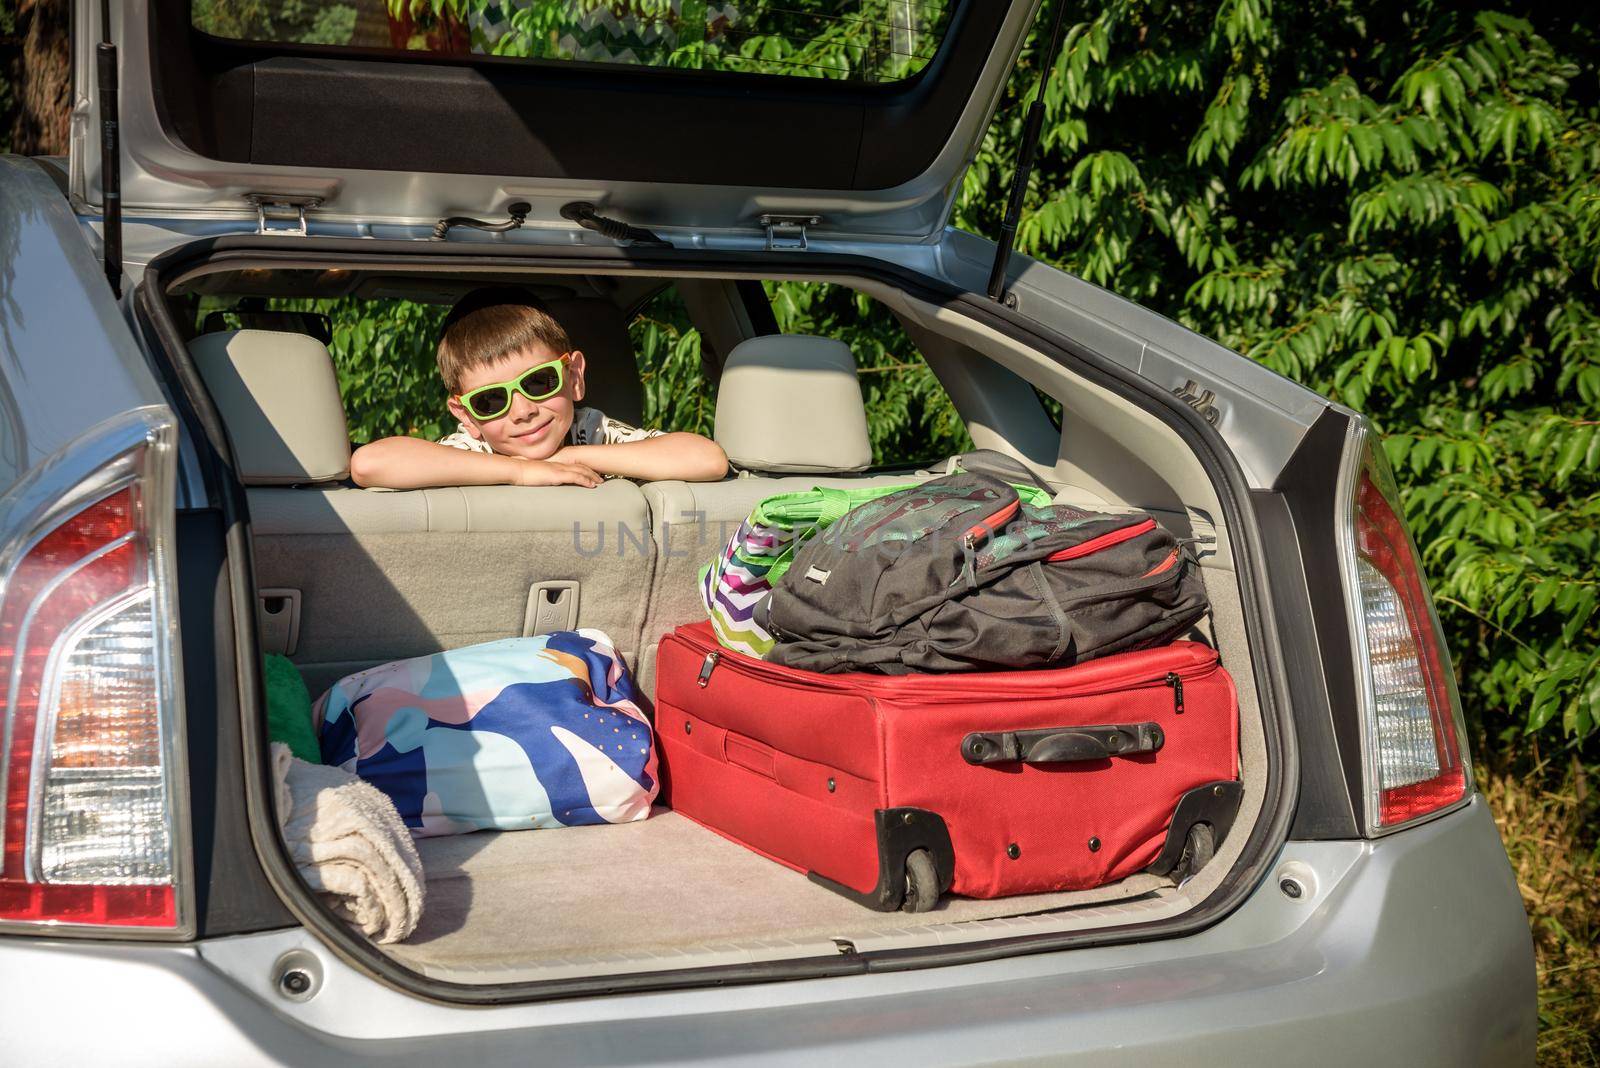 Adorable kid boy wearing sunglasses sitting in car trunk. Portrait of Happy child with open car boot while waiting for parent get ready for vocation. Family trip traveling by car concept.